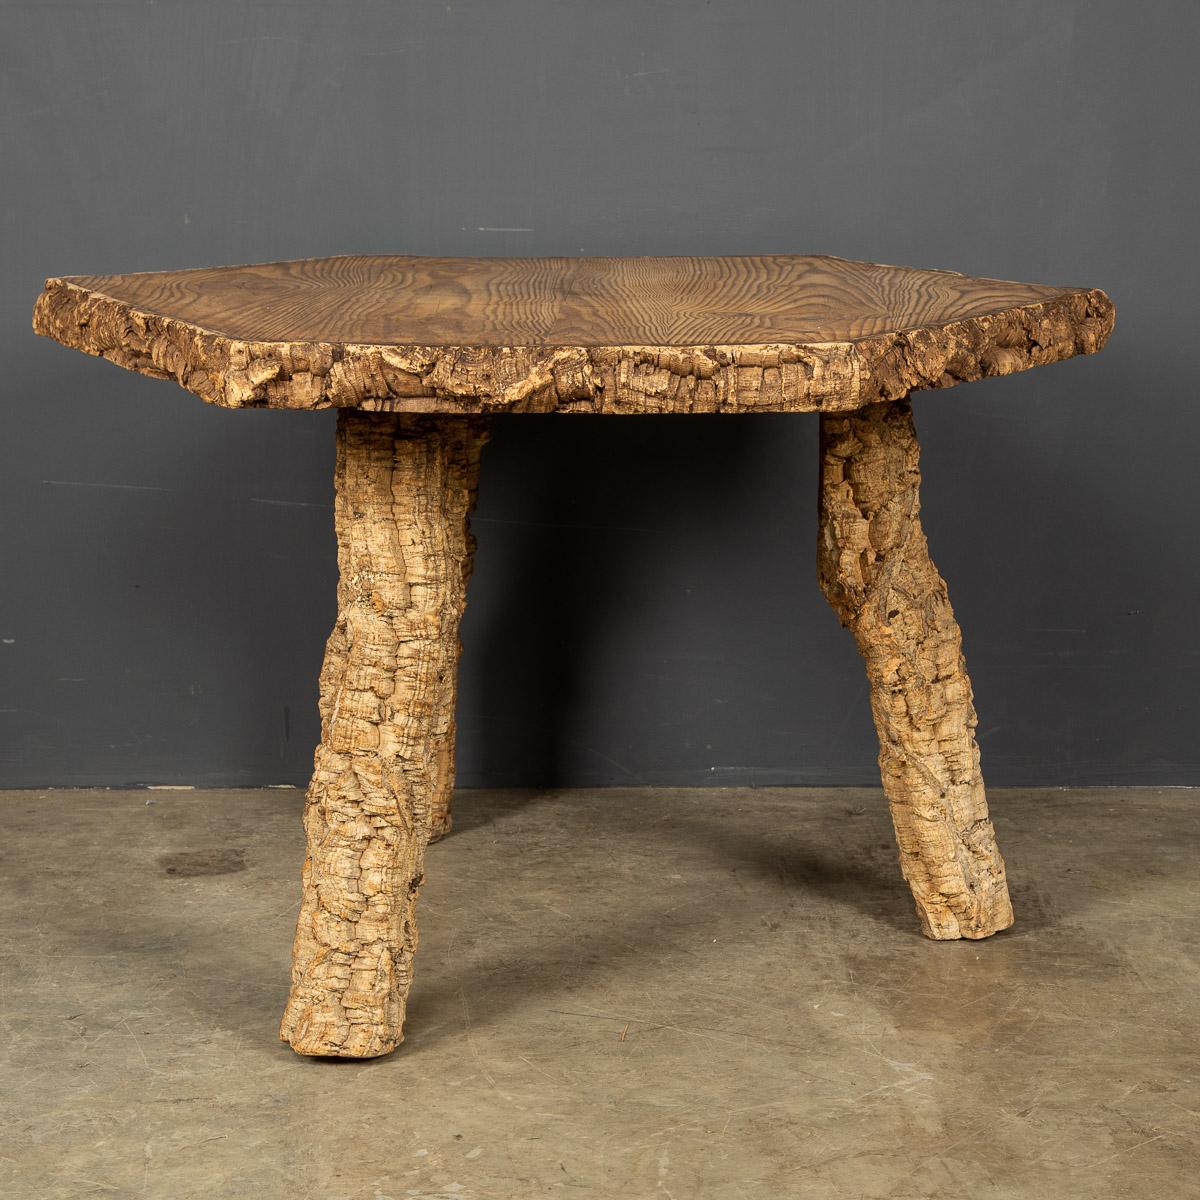 An unusual hexagonal table top made out of natural cork with three legs made from the branches of a cork tree altogether a quirky occasional table, perfect for a wine cellar as a wine sampling table c.1960.

Condition
In good condition - wear